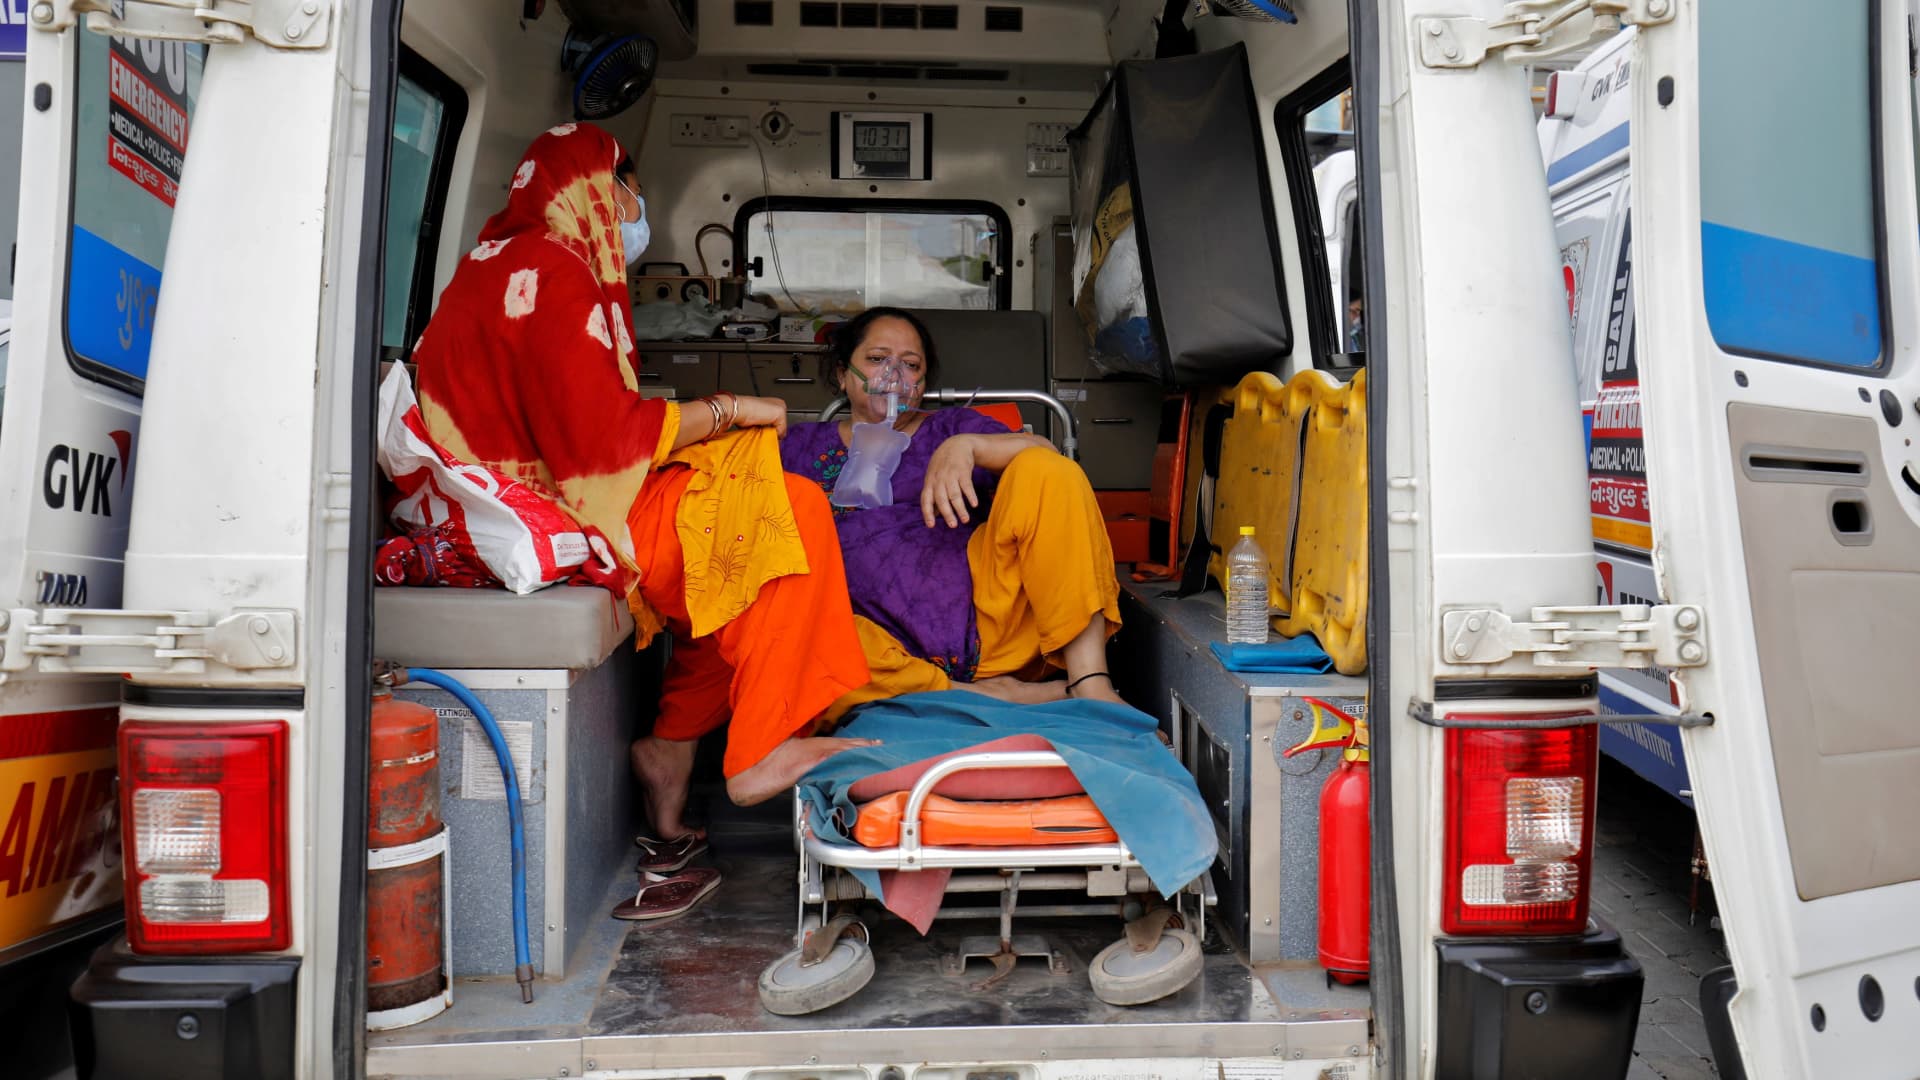 A patient with breathing problem is seen inside an ambulance waiting to enter a COVID-19 hospital for treatment, amidst the spread of the coronavirus disease (COVID-19) in Ahmedabad, India, April 20, 2021.